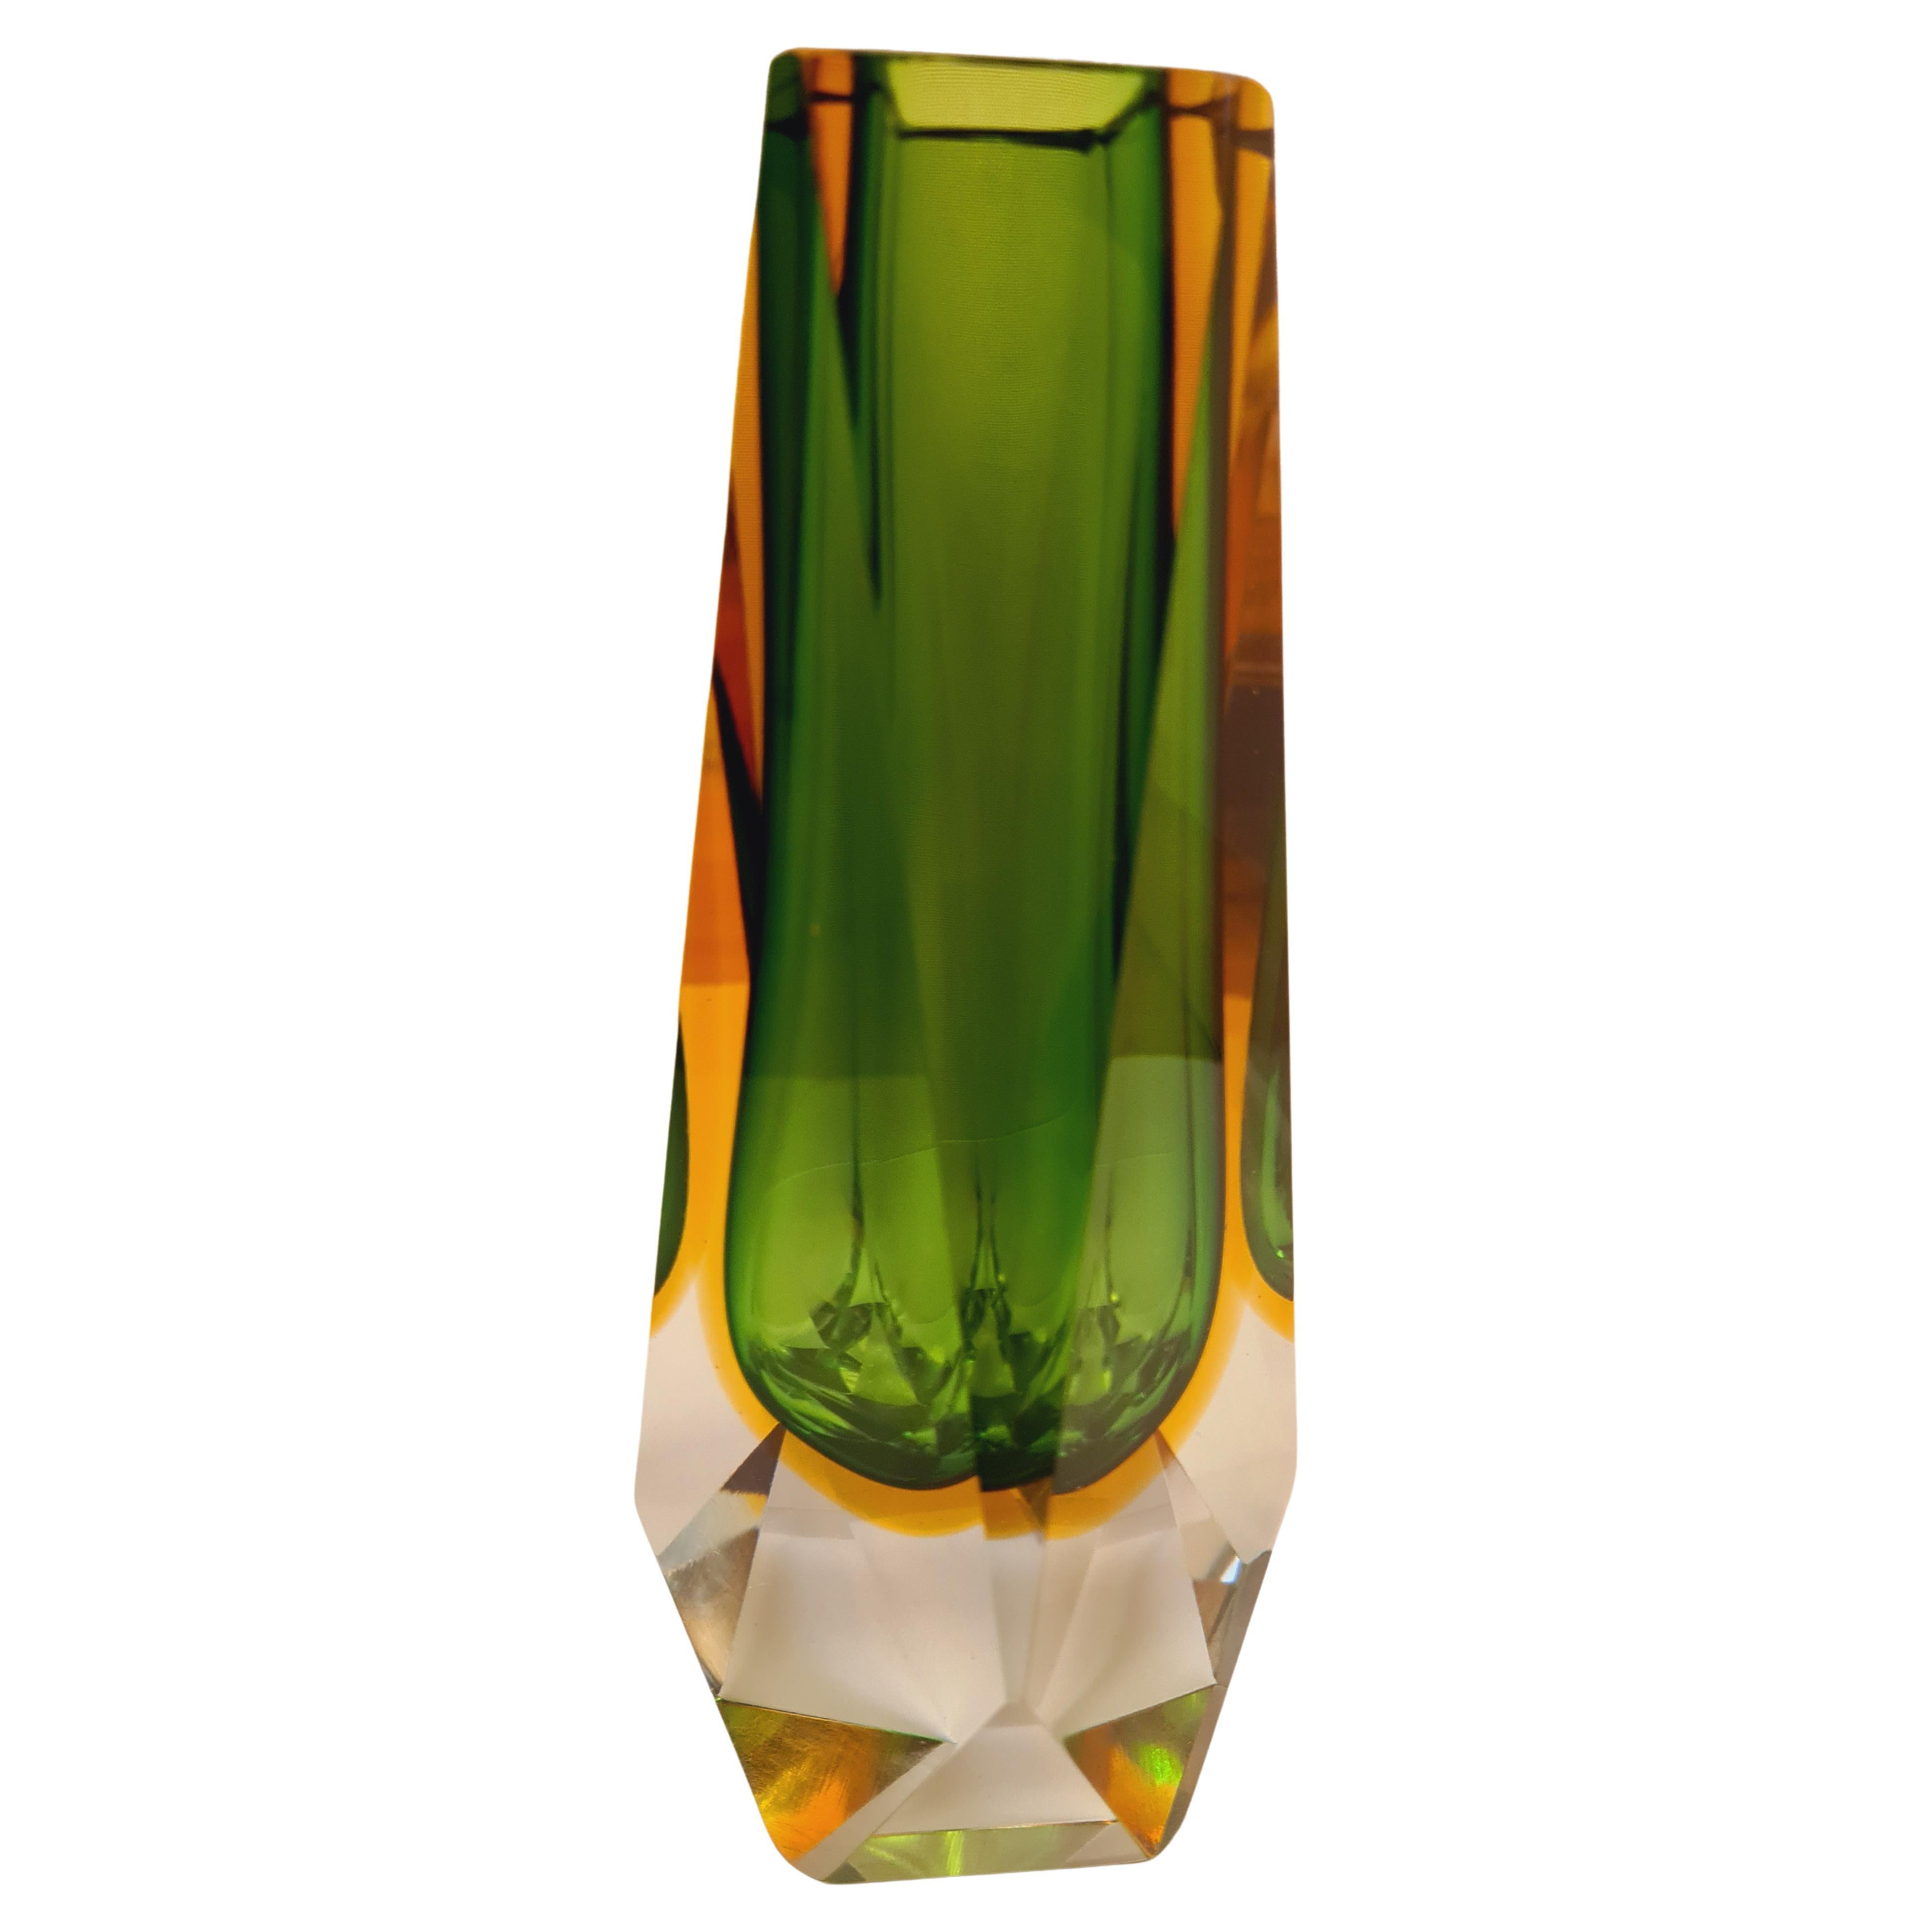 Middle of Century Sommerso Faceted Murano Glass Vase